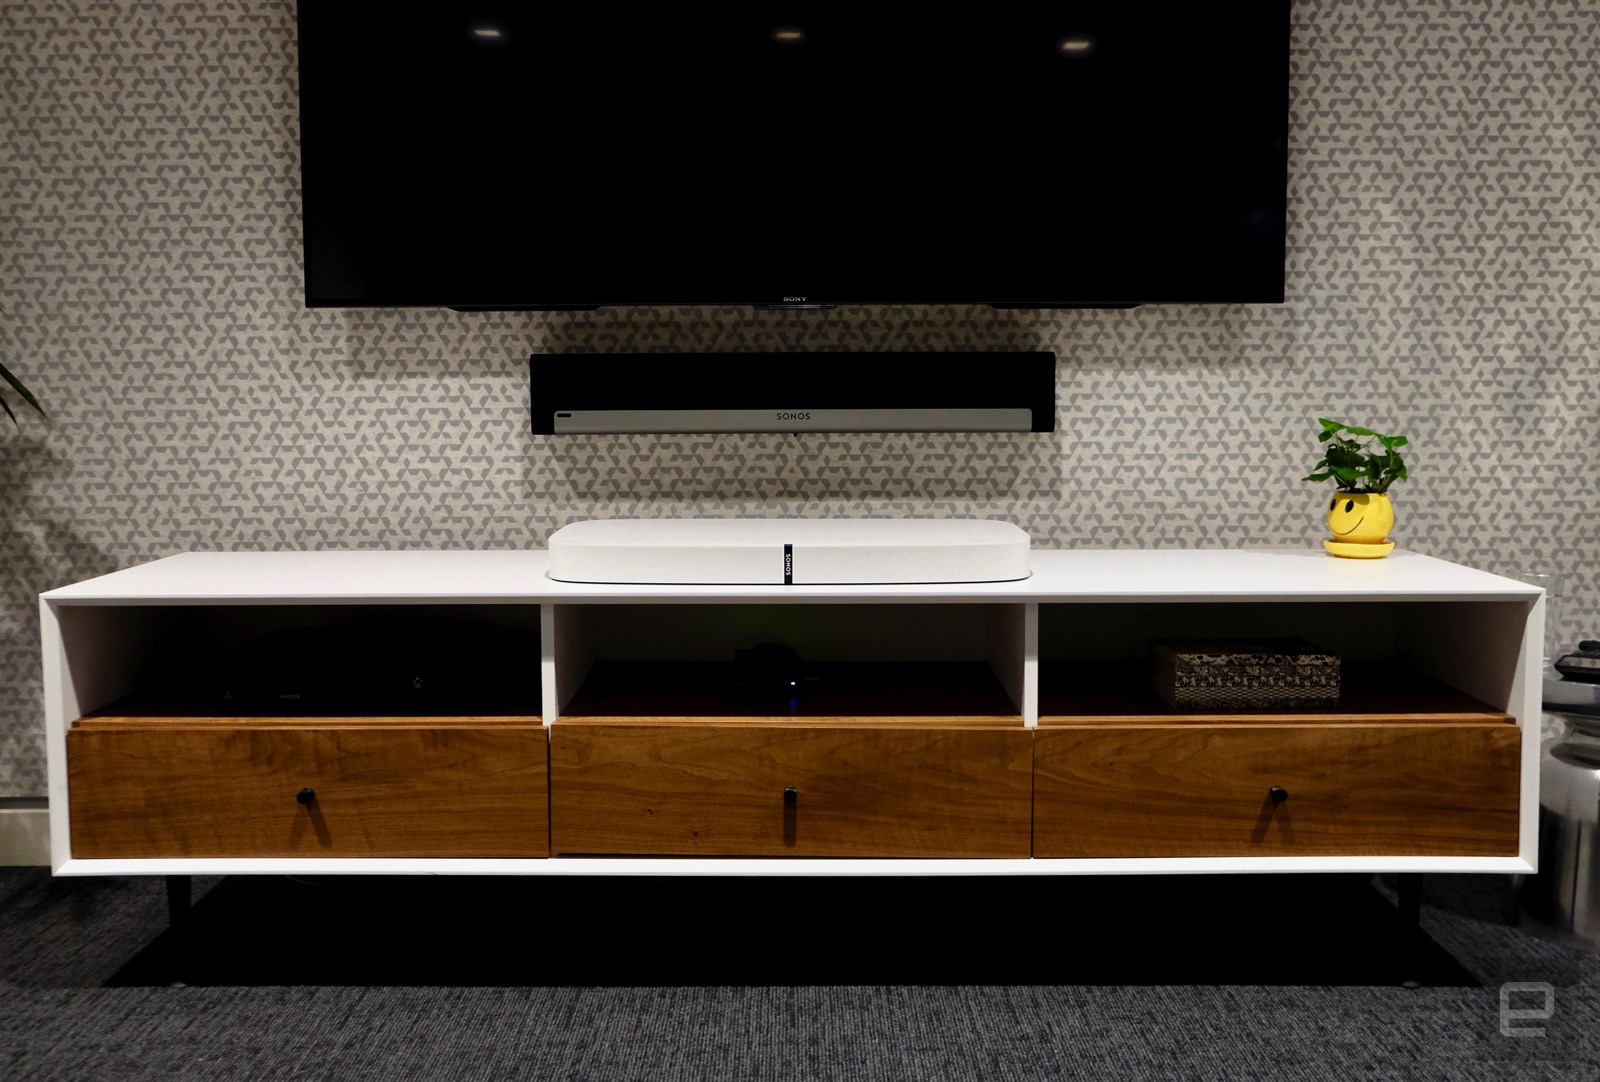 Punto muerto Modales director How Sonos made the new Playbase sound a lot better than it should | Engadget